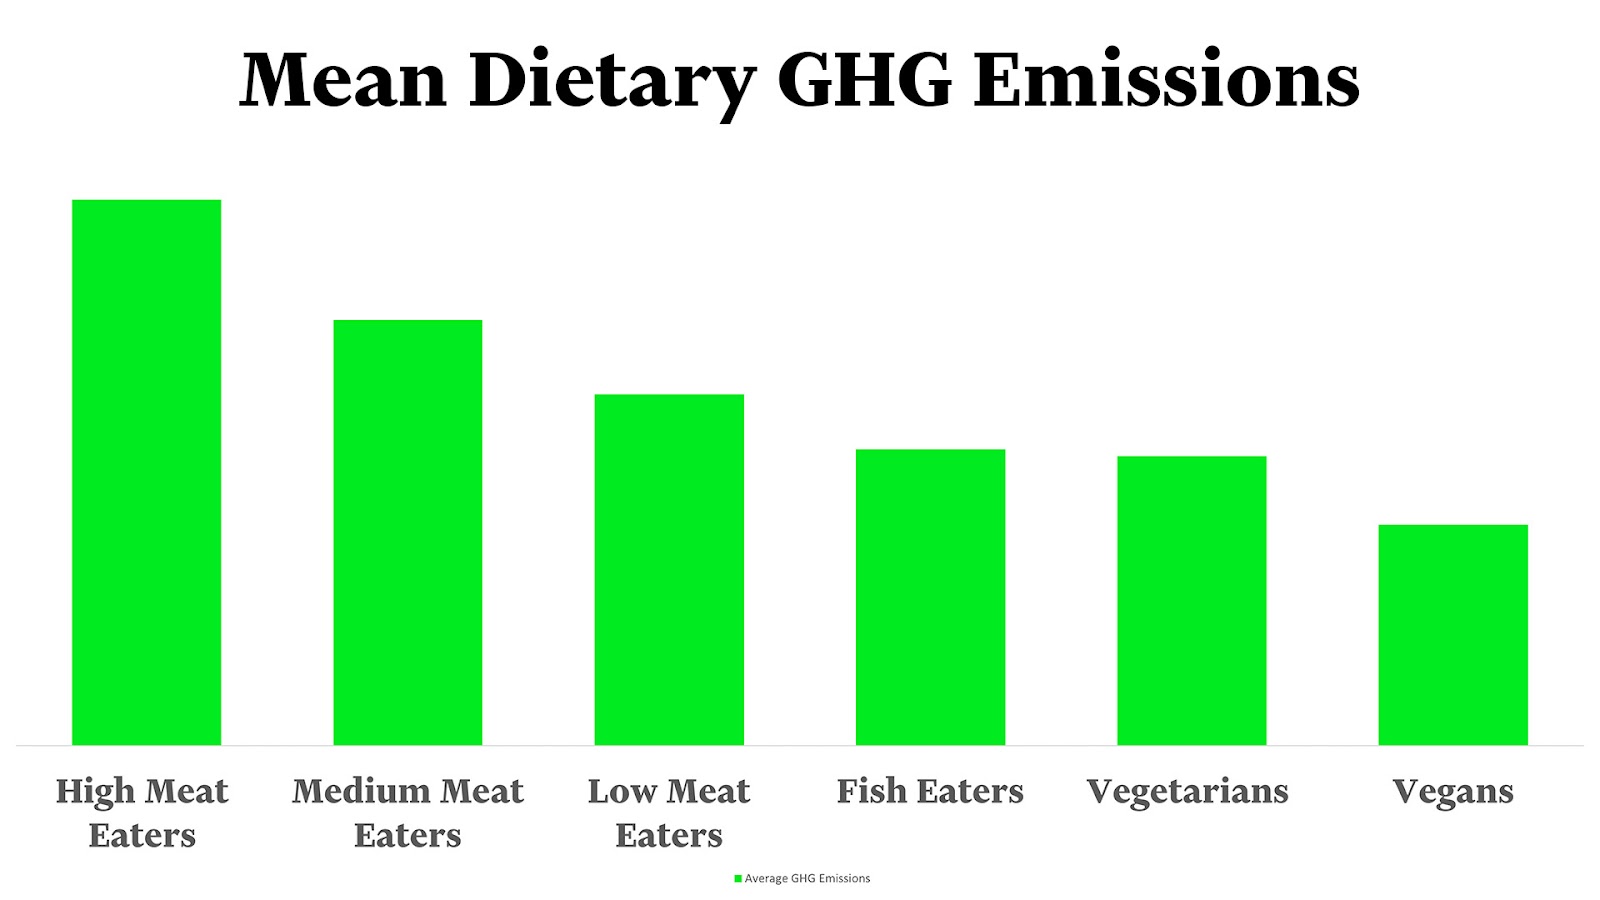 Chart comparing GHG emissions of different dietary habits 